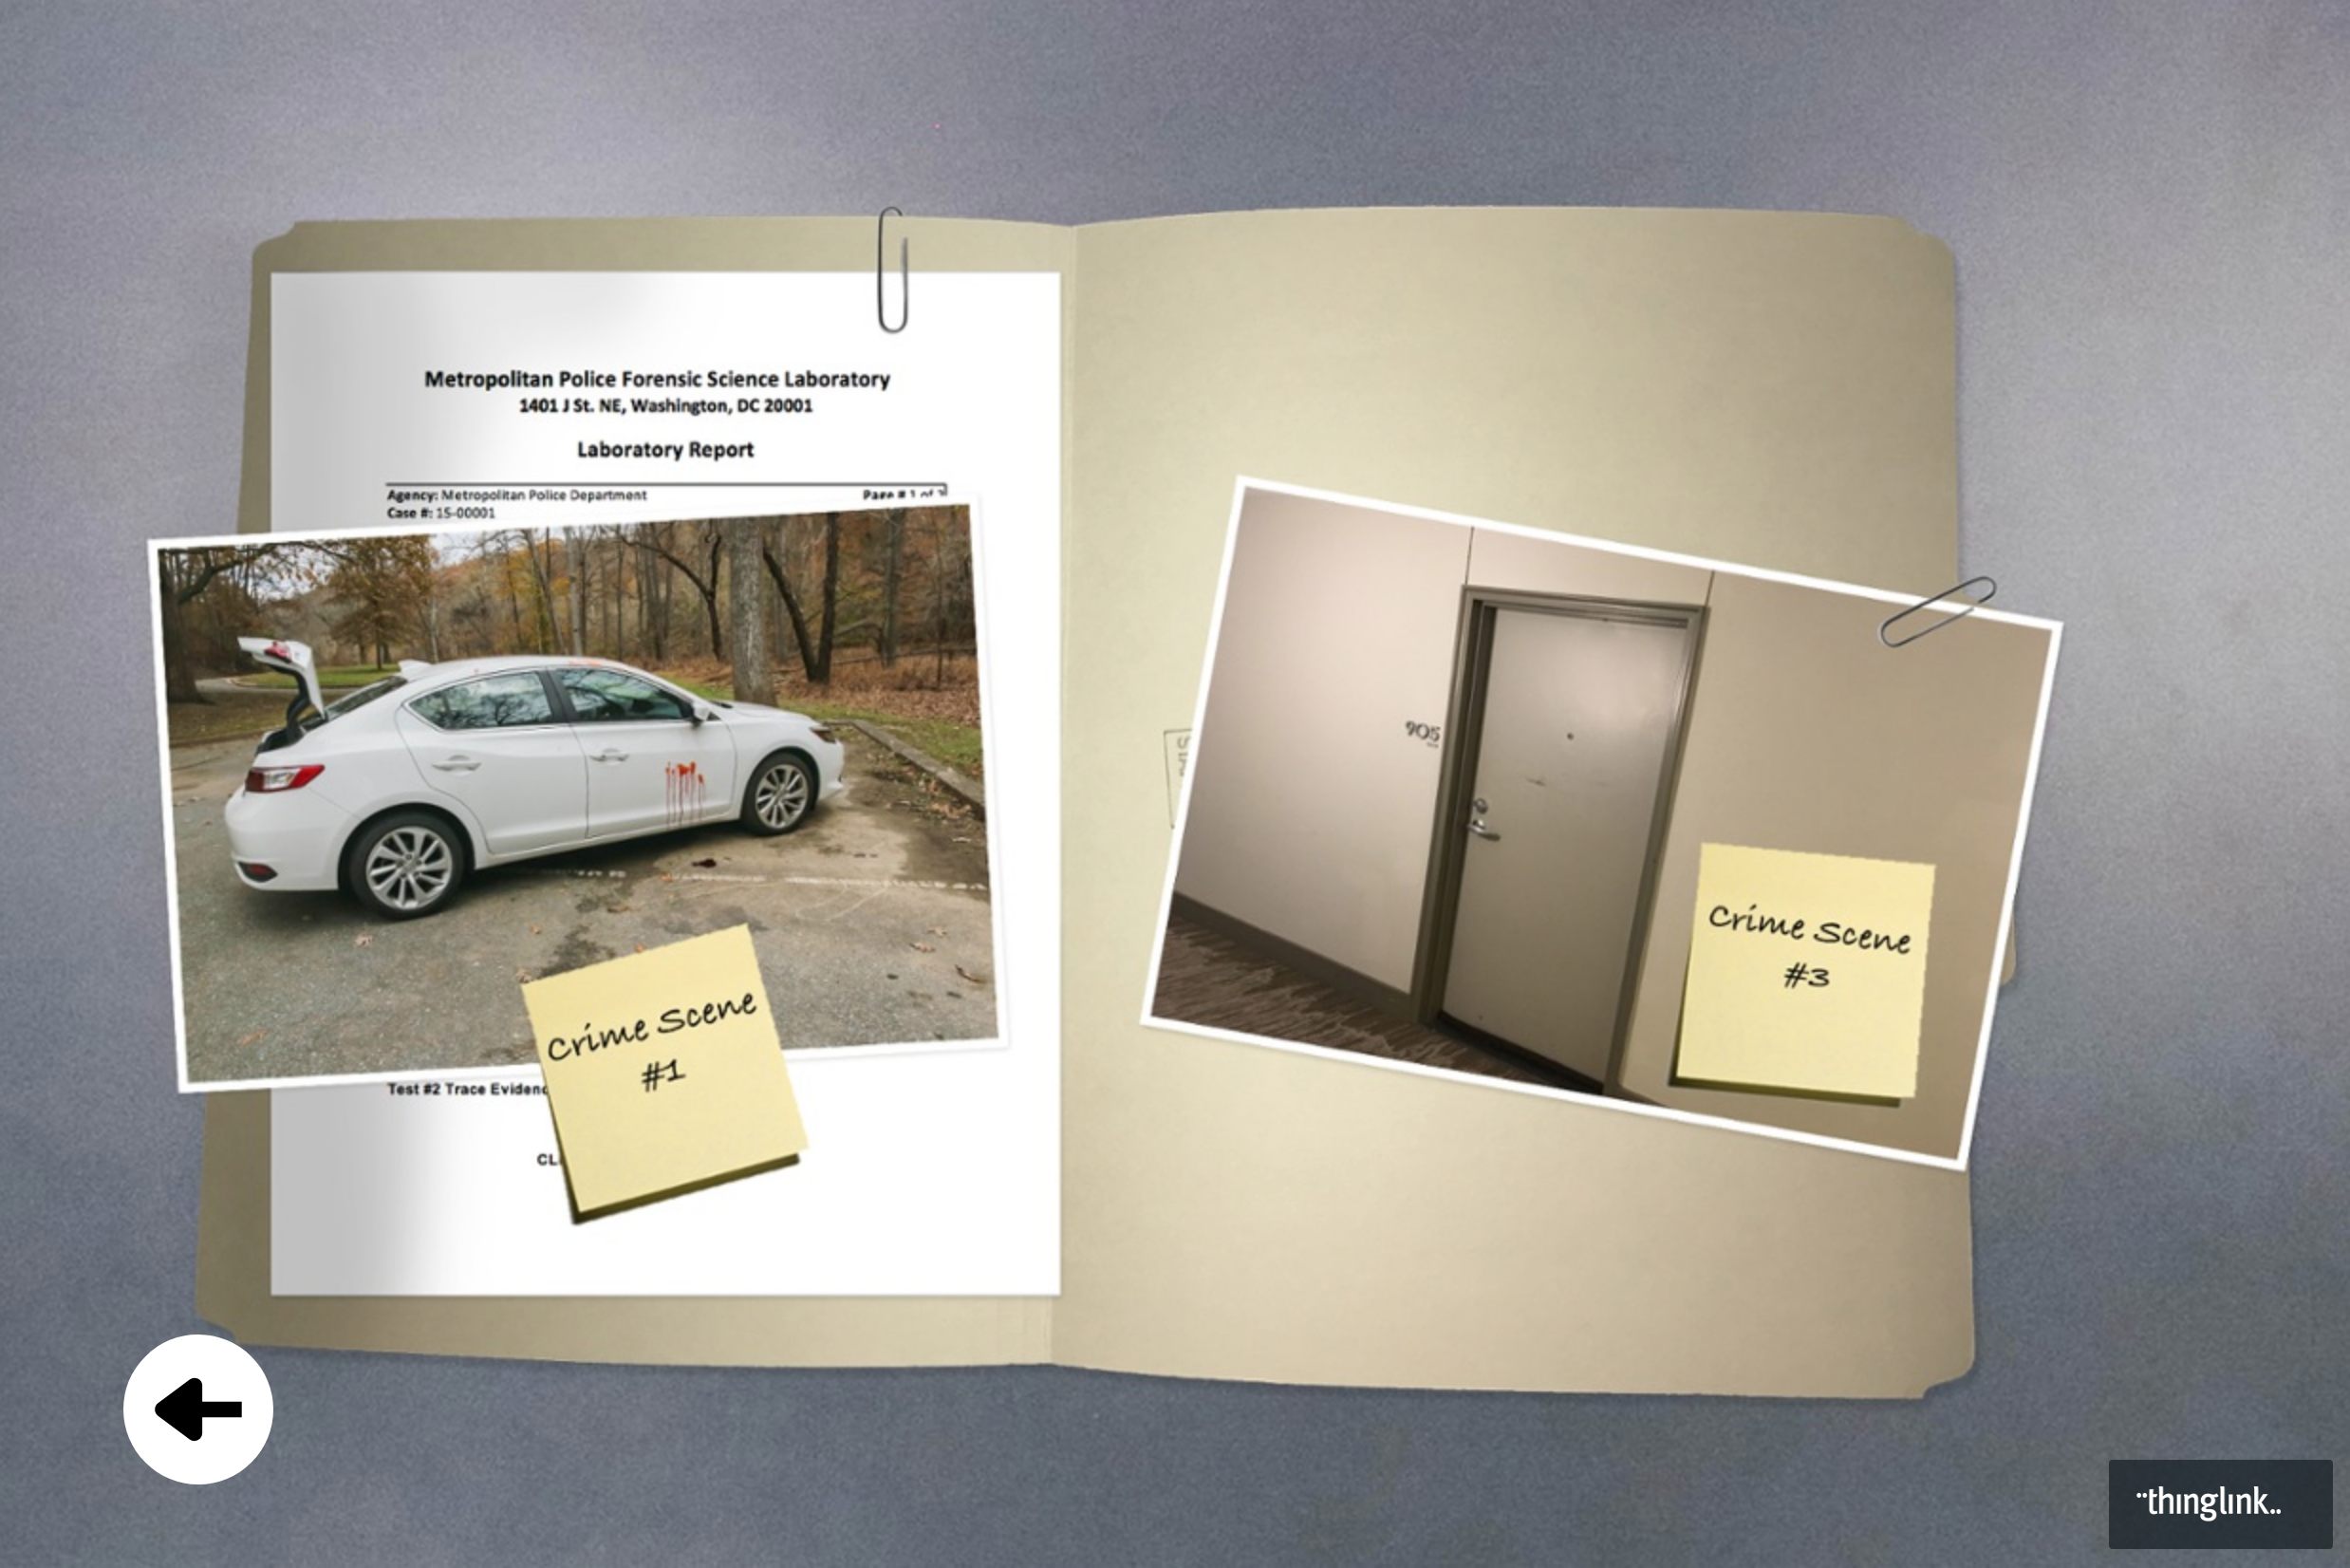 This screenshot from the simulation shows a navigation screen that allows students to select which aspect of the investigation they wish to pursue.